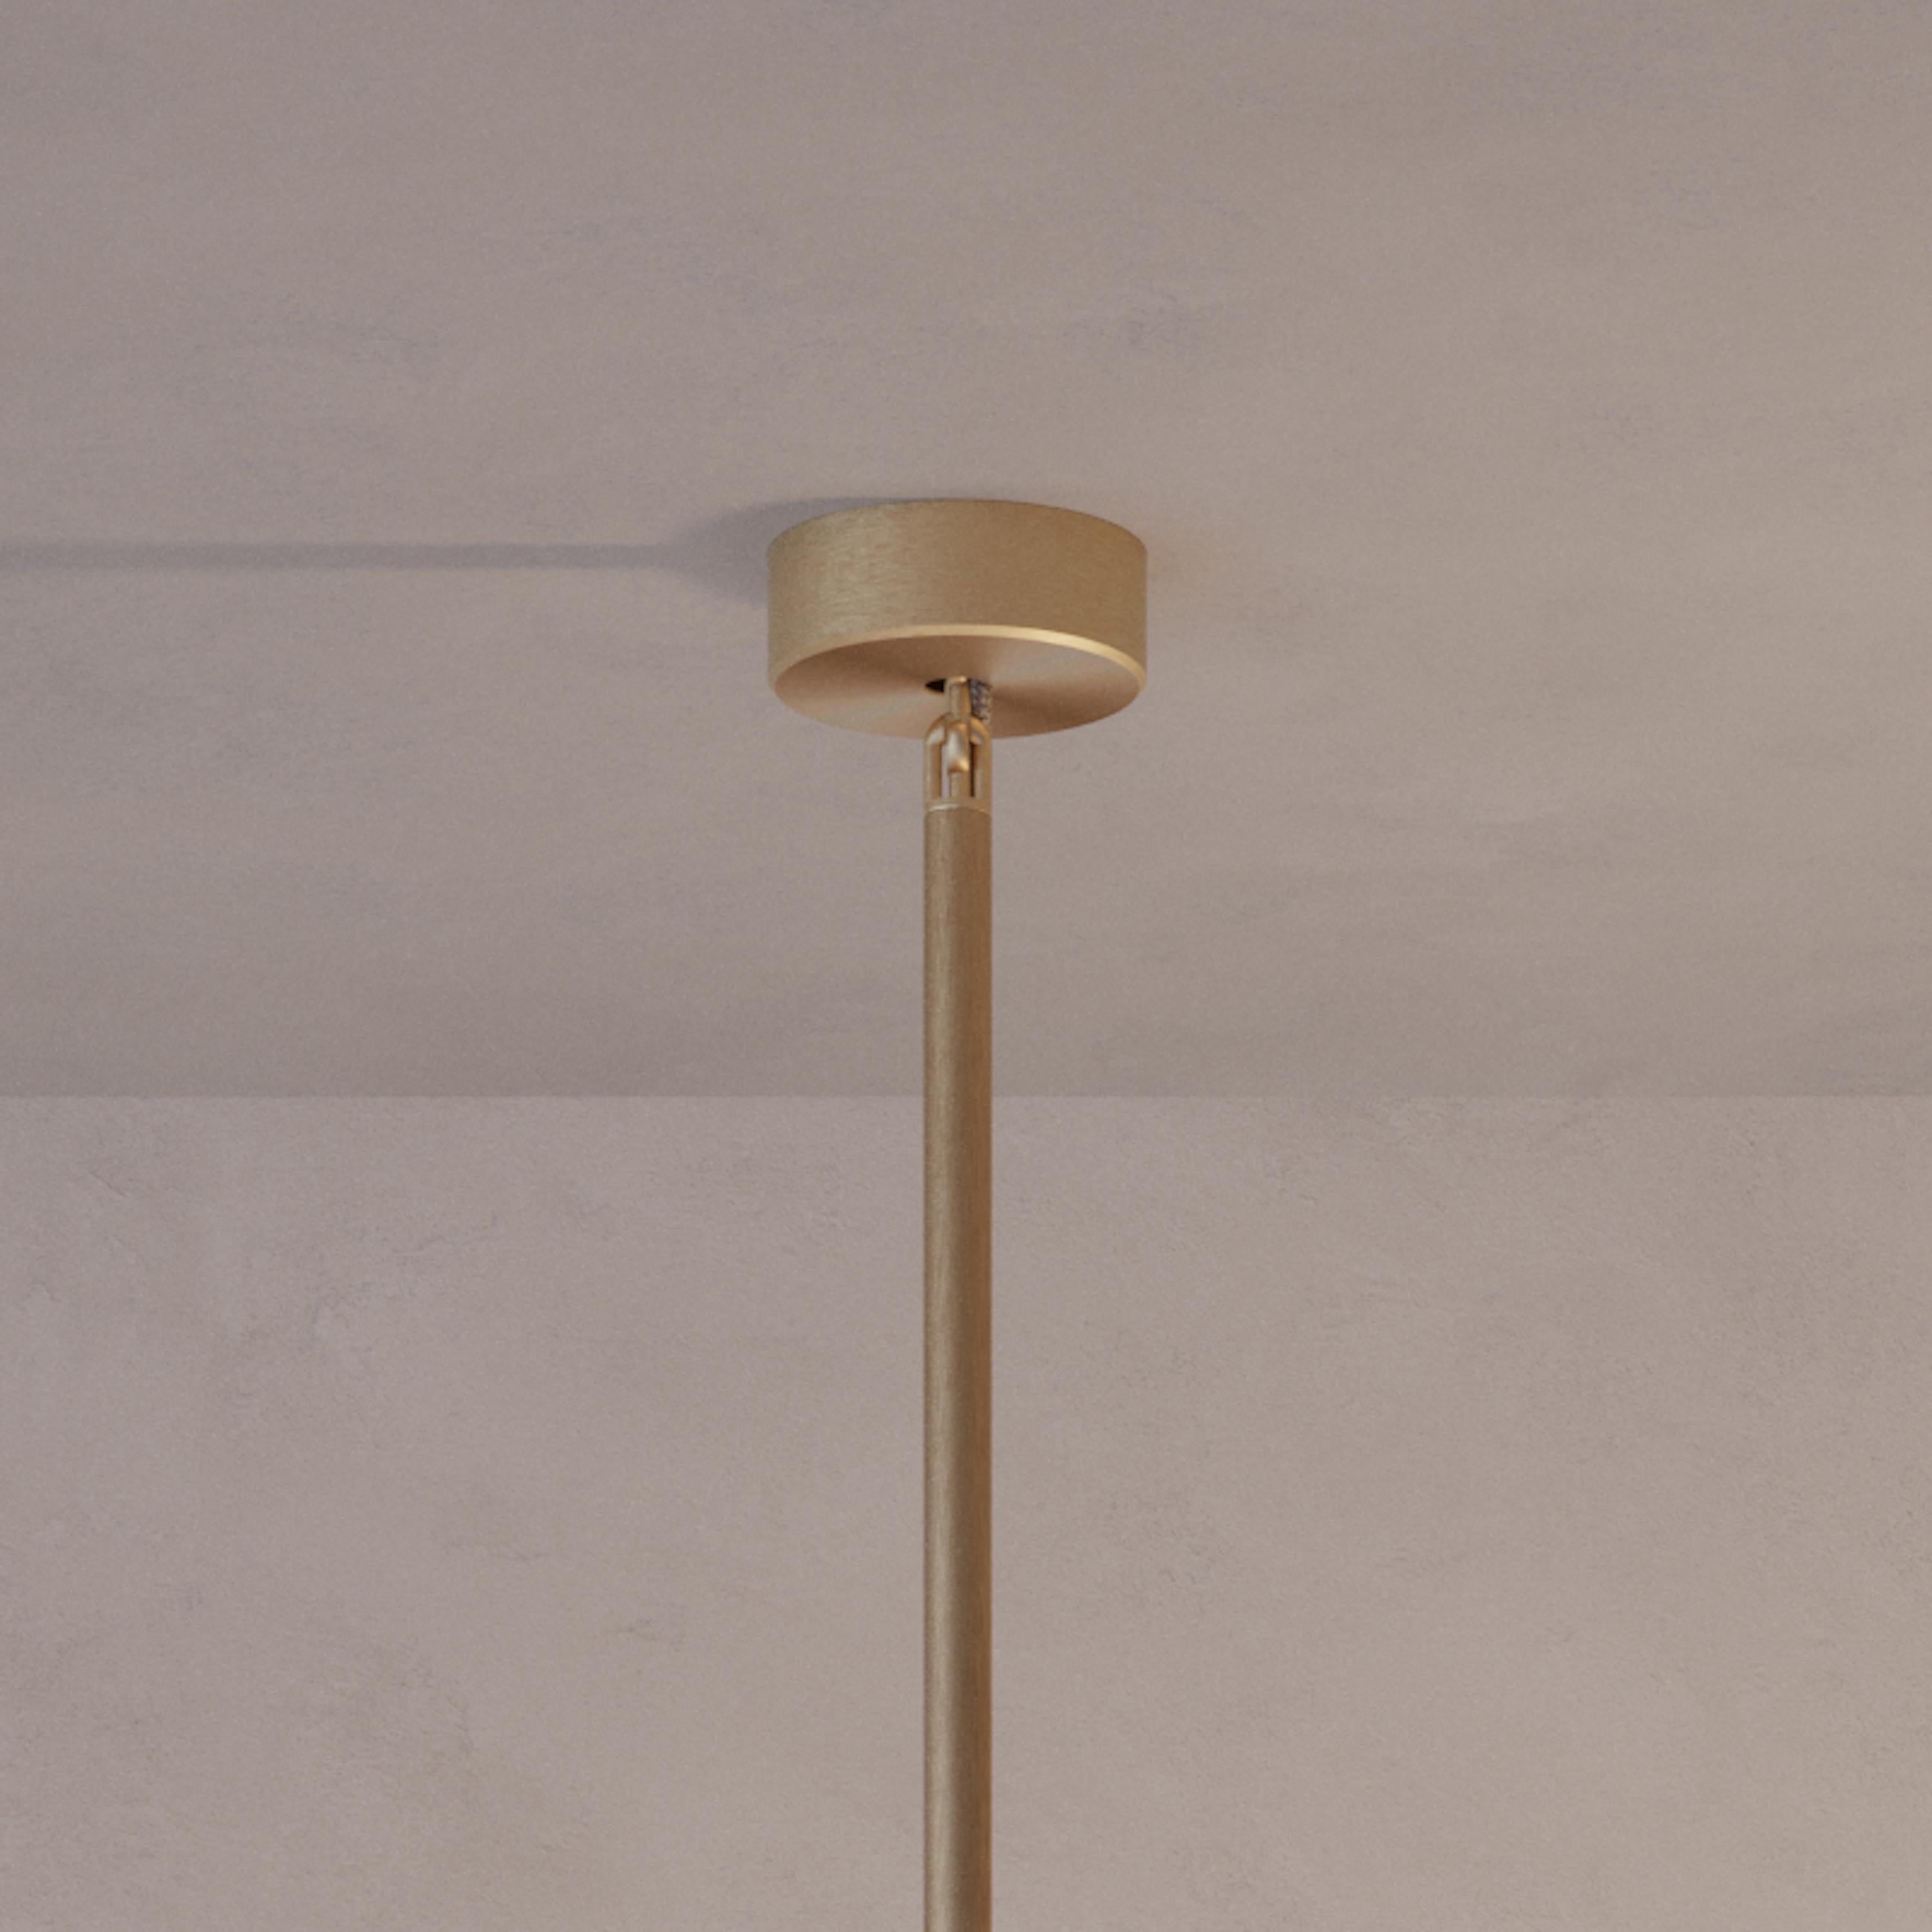 Two lighting components harmoniously balanced, framing this unique ceiling light. Composed by patinated brass plates and finely brushed brass framework, the Orbit Solo ceiling light is softly illuminated with LED elements from within.
 
This